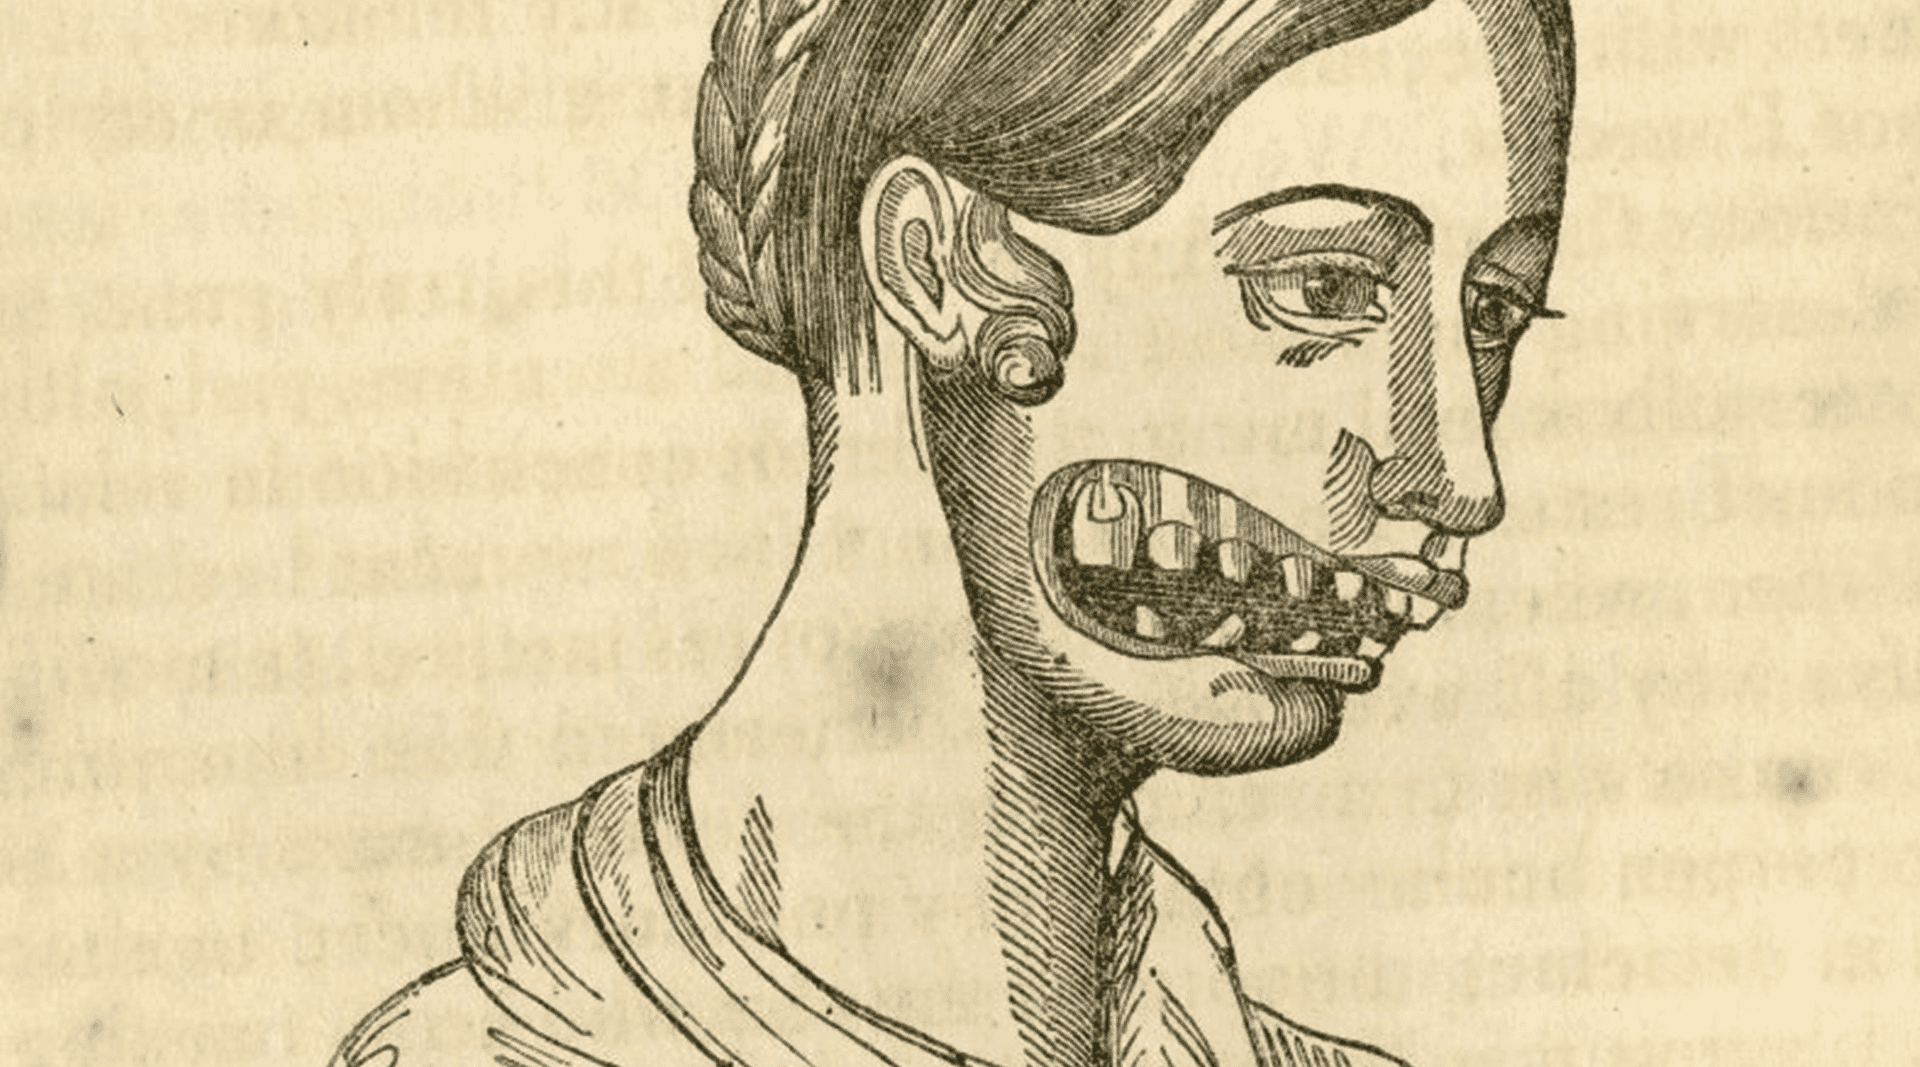 Illustration of woman with facial skin damaged and revealing broken teeth